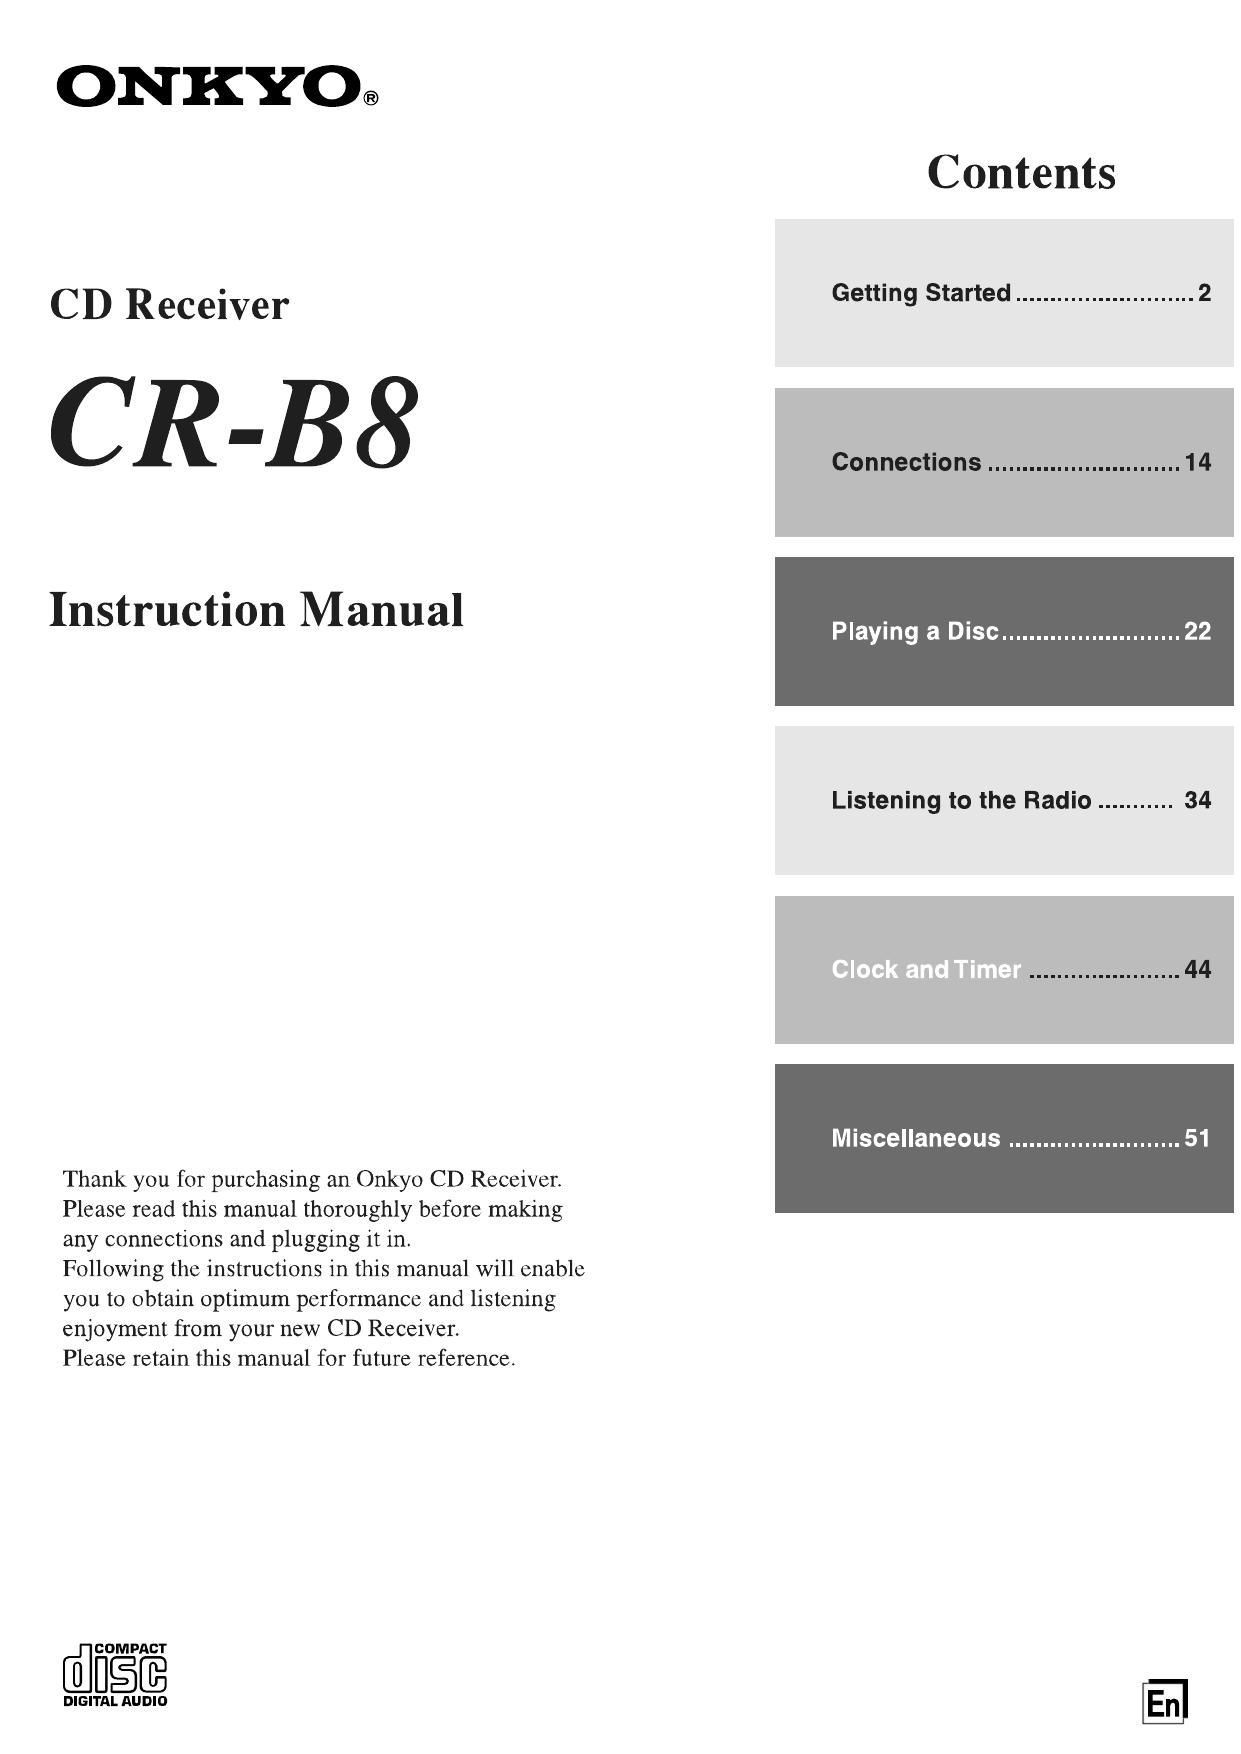 Onkyo CRB 8 Owners Manual